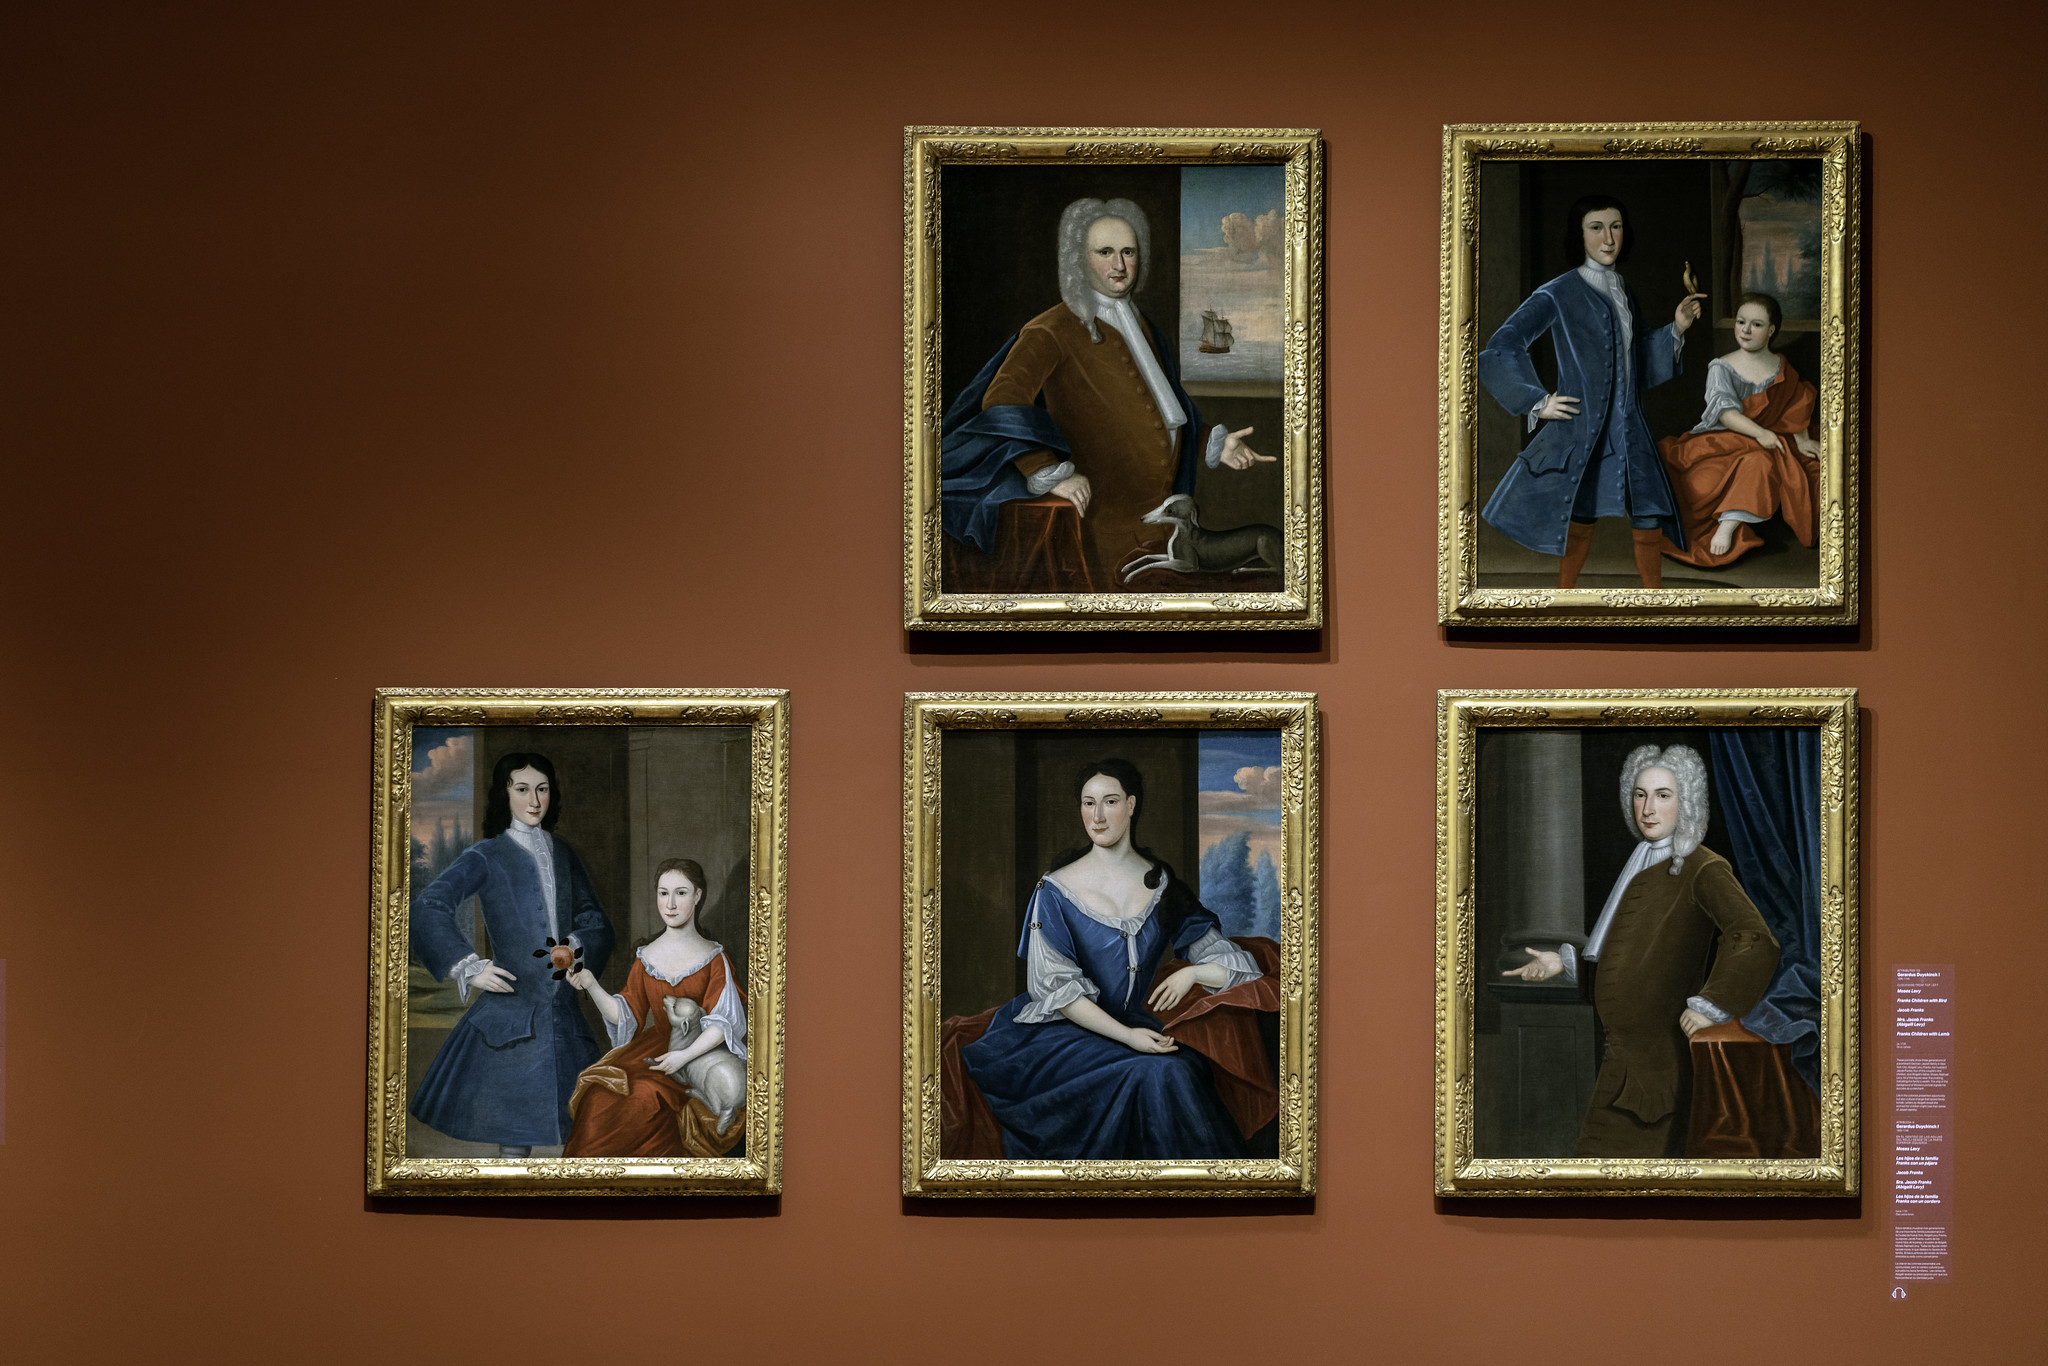 Gerardus Duyckinck I (attributed), six portraits of the Levy-Franks family (Franks Children with Bird, Franks Children with Lamb, Jacob Franks, Moses Levy, Mrs. Jacob Franks (Abigaill Levy), and Ricka Franks), c. 1735, oil on canvas (Crystal Bridges Museum of American Art)